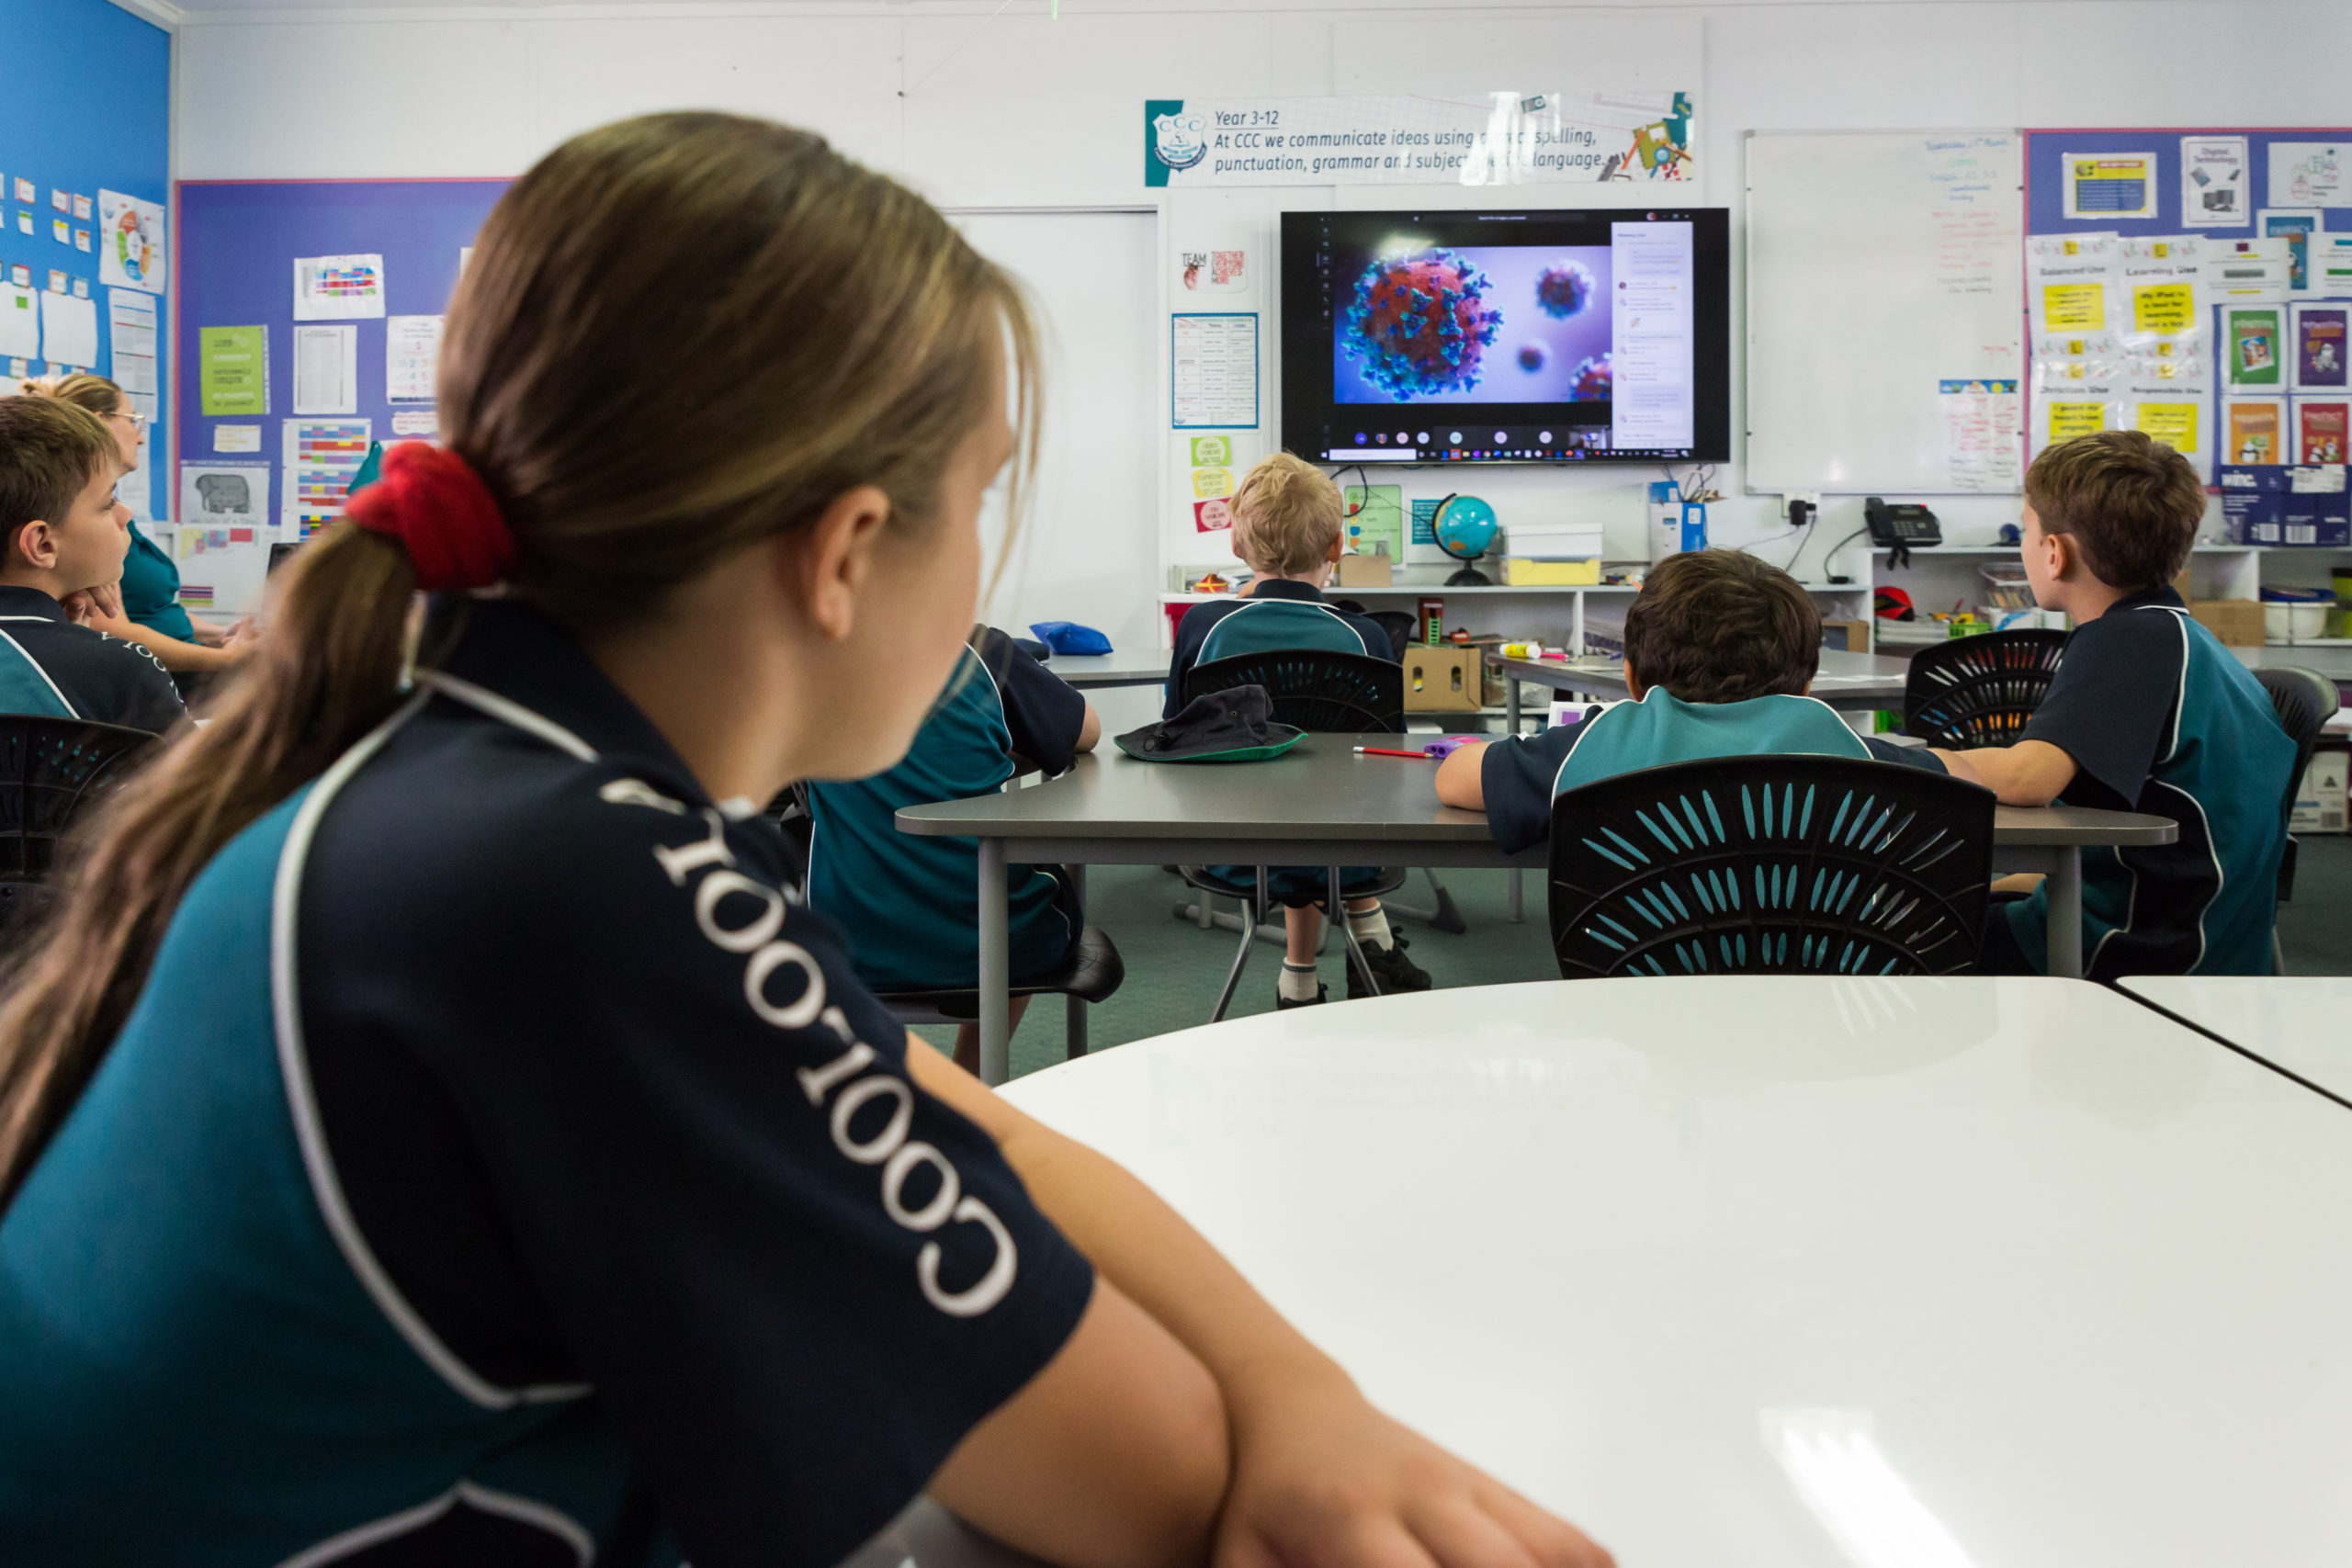 Students in a classroom looking at a classroom display mounted at the front of the class.